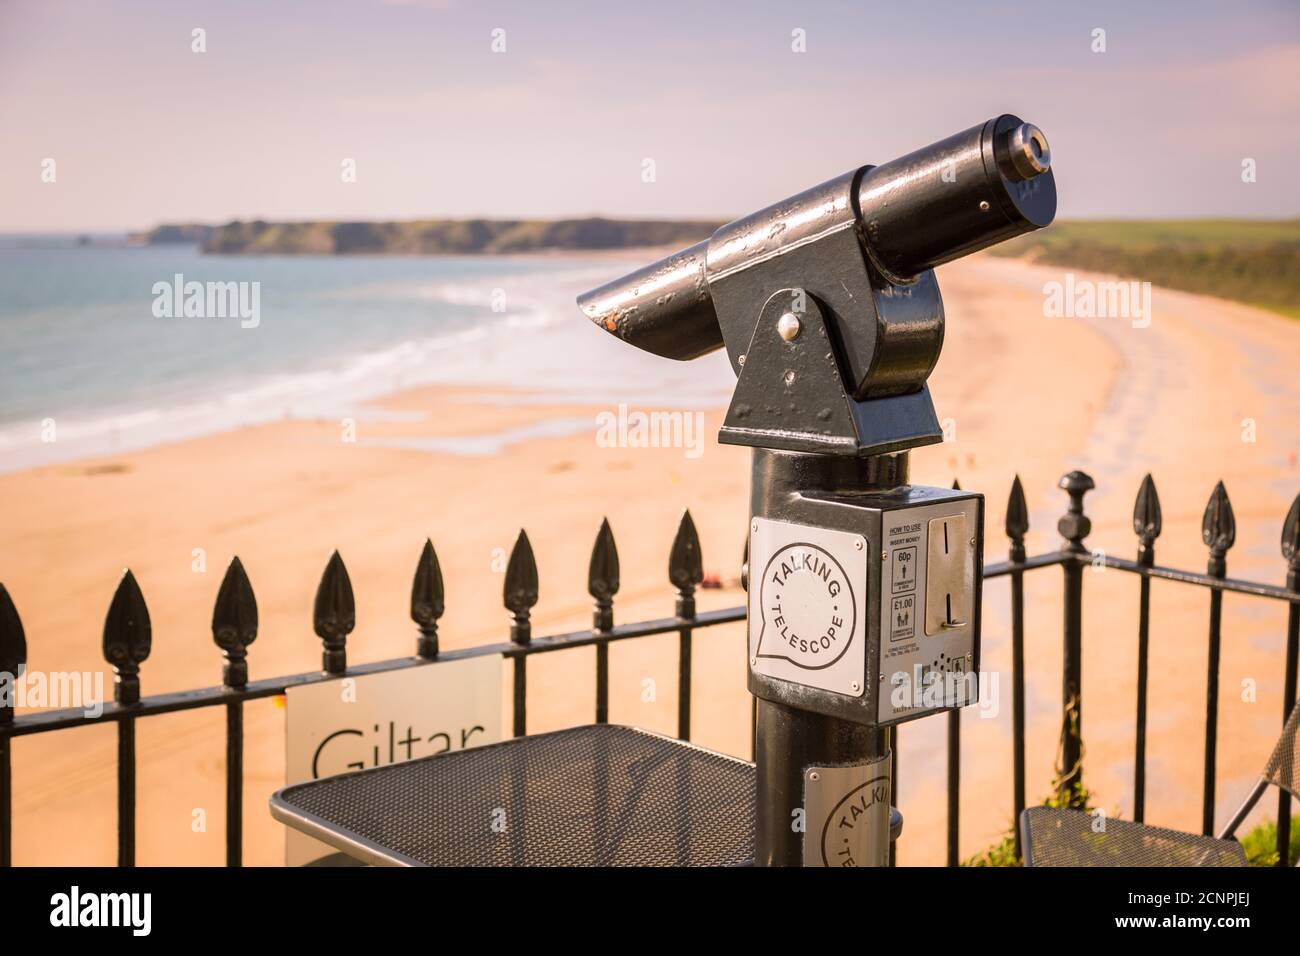 Coin operated telescope, Tenby esplanade, Pembrokeshire, Wales, UK Stock Photo